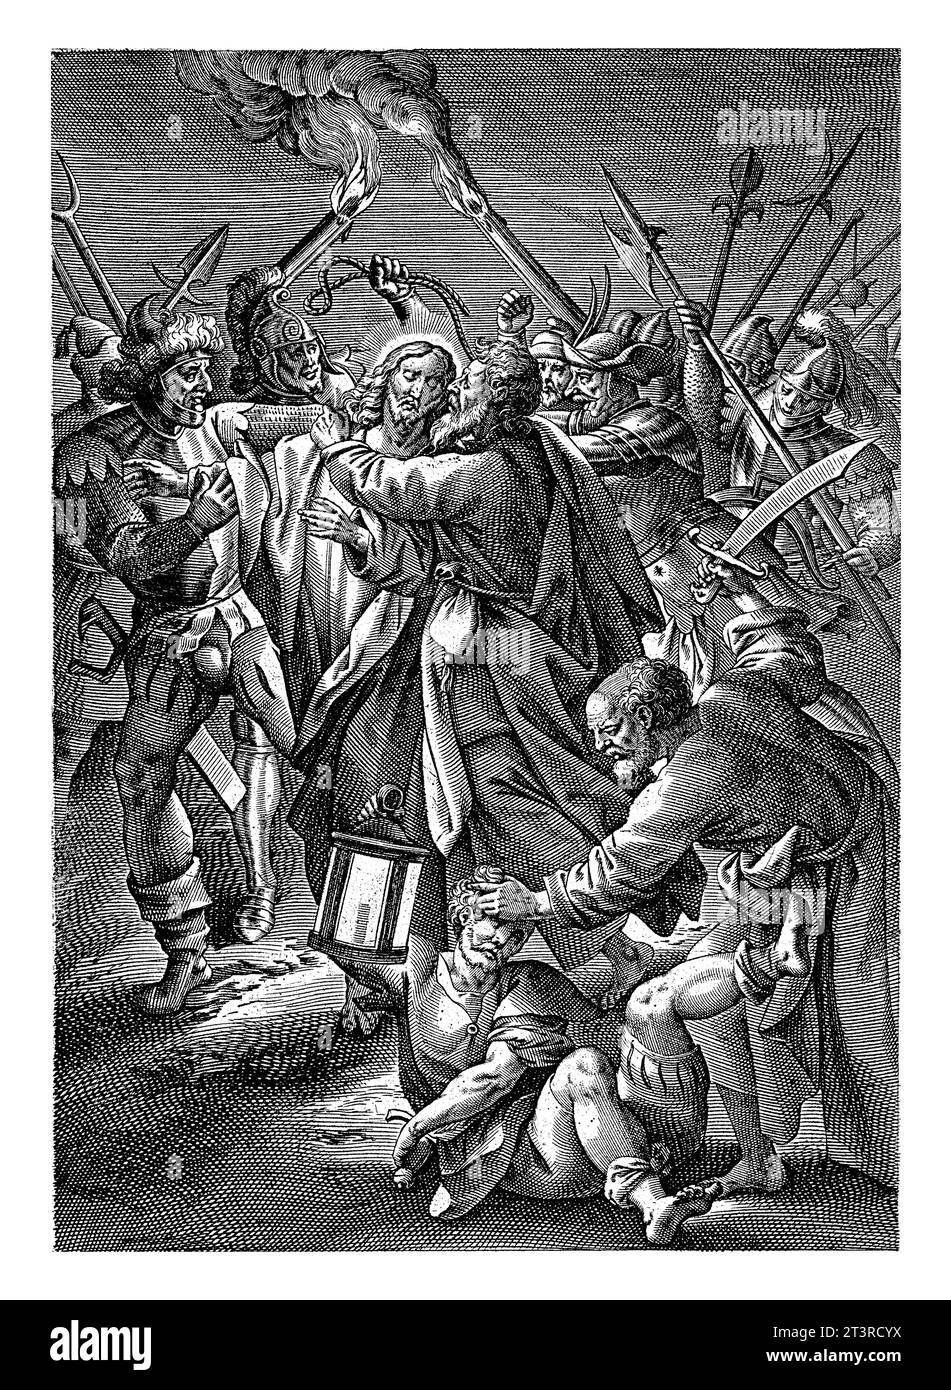 Judas Kiss and Arrest of Christ, Antonie Wierix (II), after Maerten de Vos, 1583 - 1587 Judas kisses Christ on the cheek. The soldiers surround and ar Stock Photo